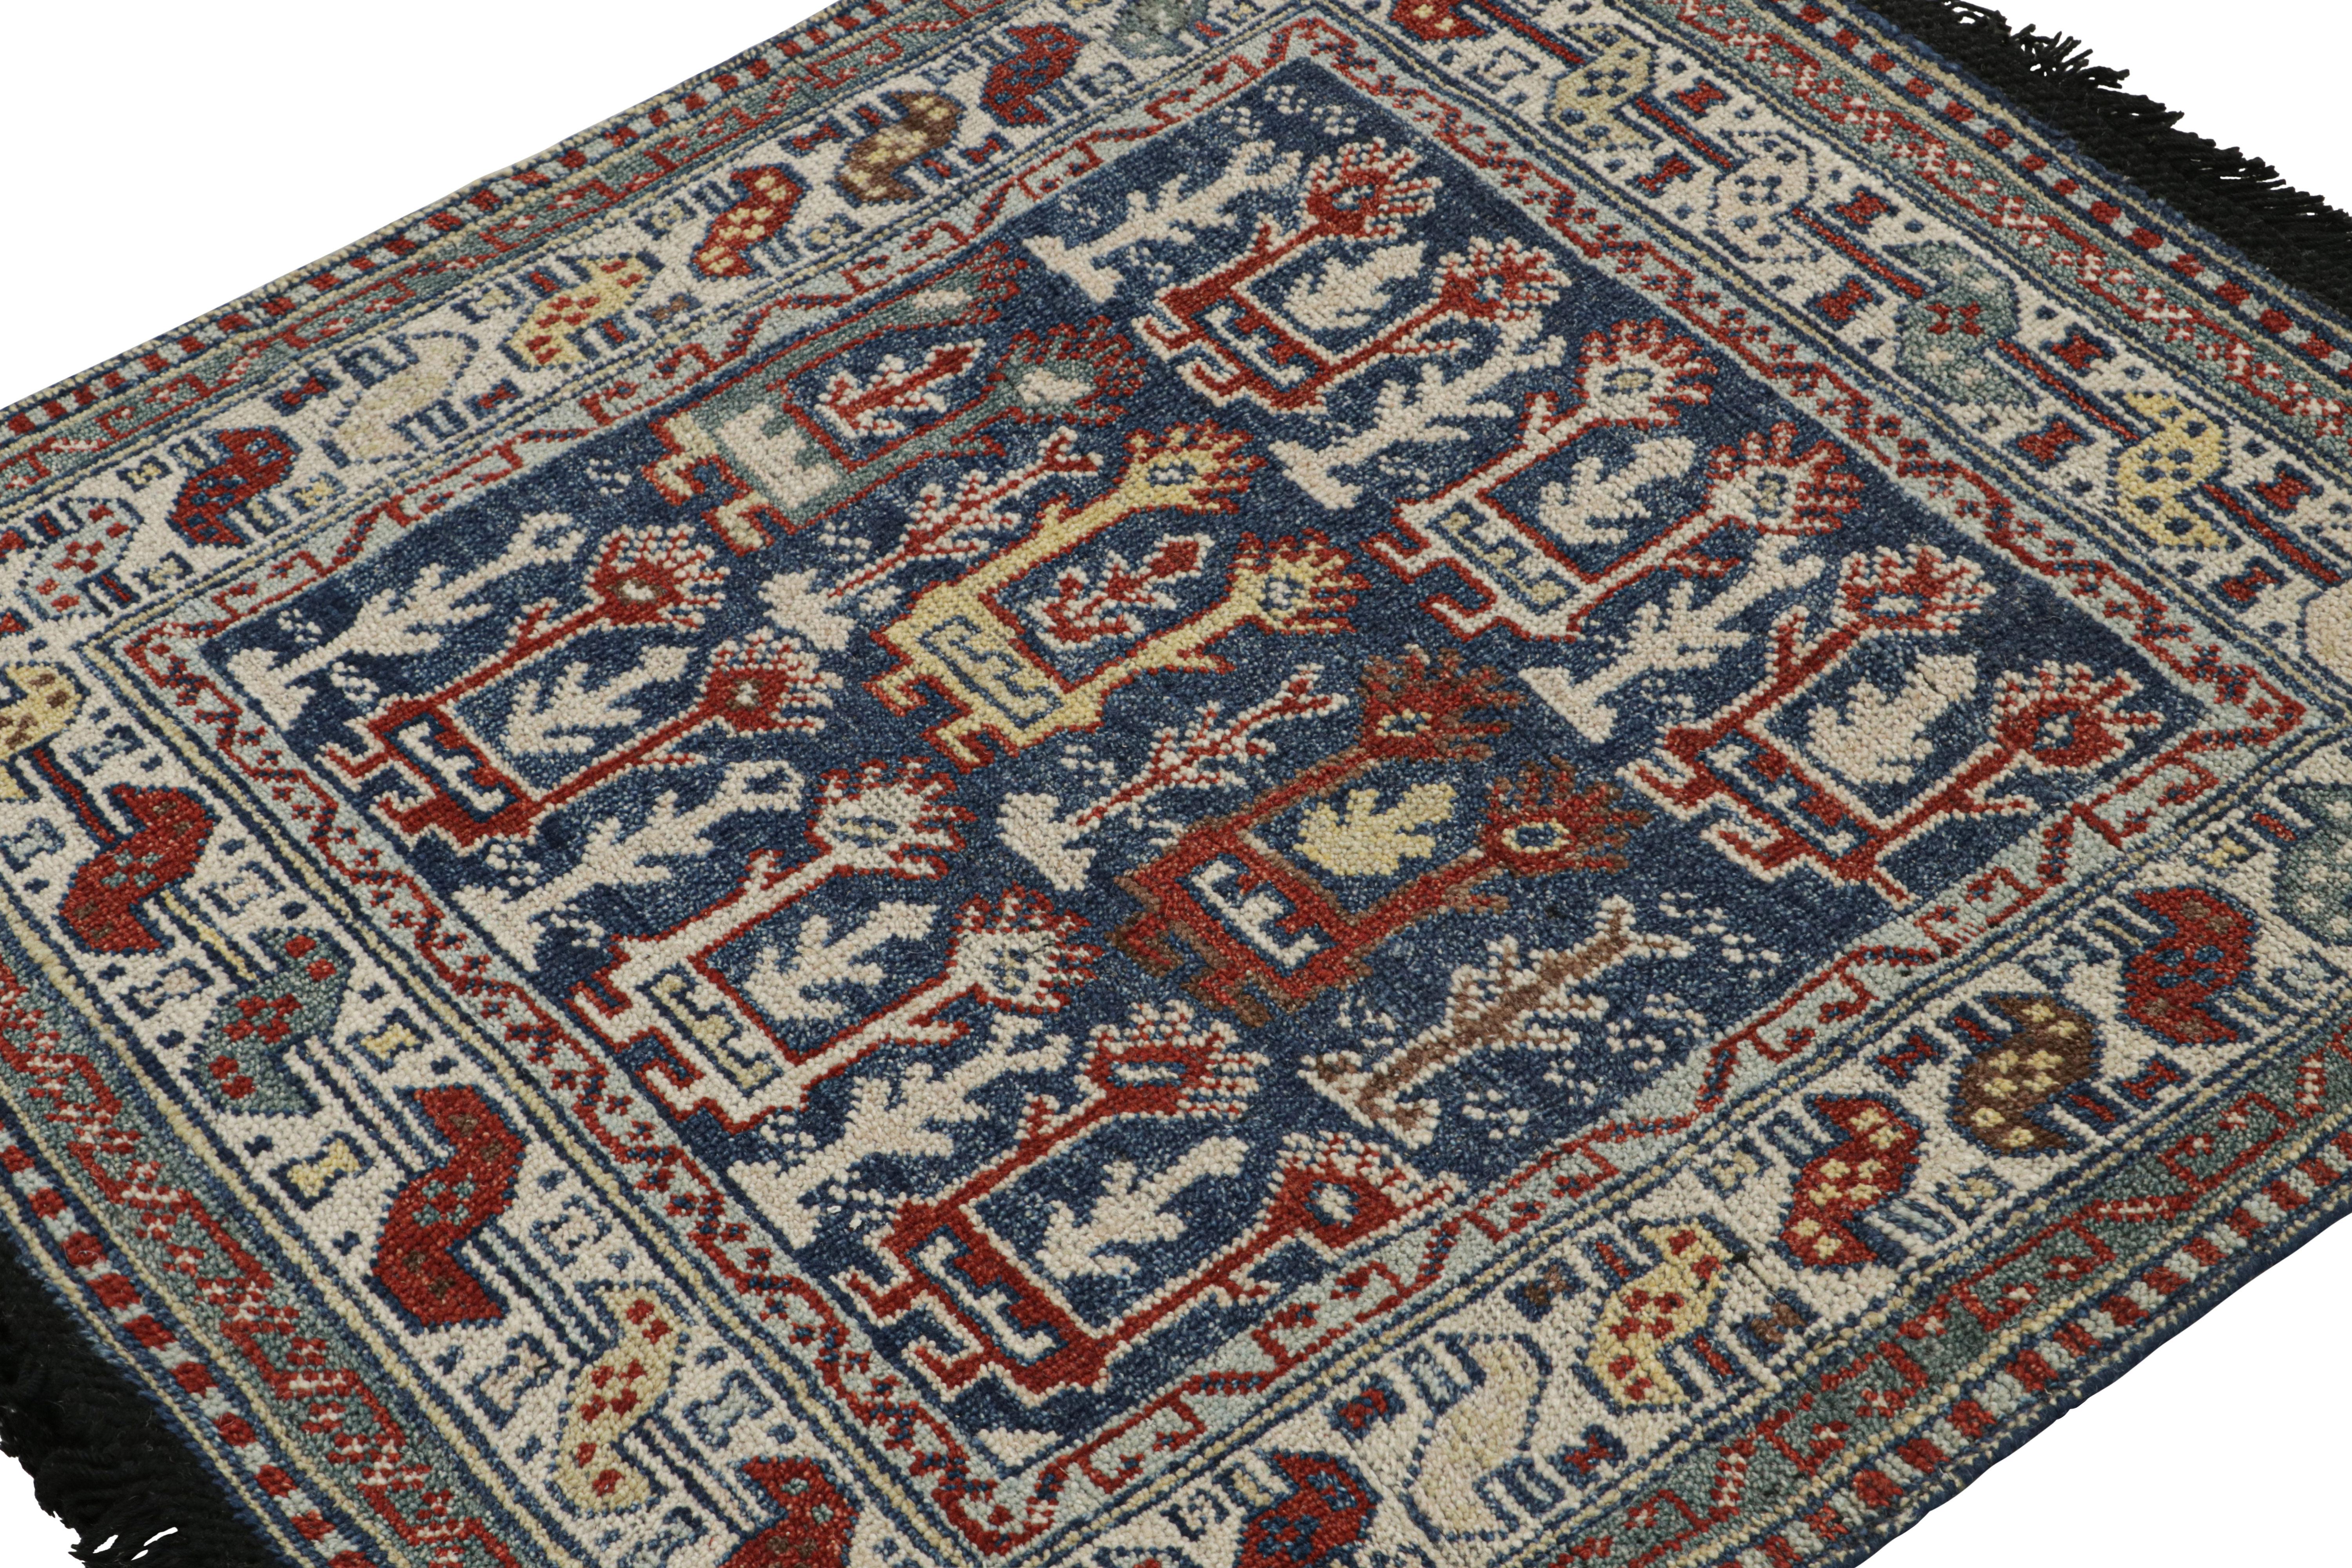 Inspired by antique tribal rugs with similar aesthetics such as caucasian Kuba rugs and some Persian rugs, this 3x3 square rug from our Burano collection is hand knotted in Ghazni wool. 

On the Design: 

Particularly inspired by the nomadic tribal